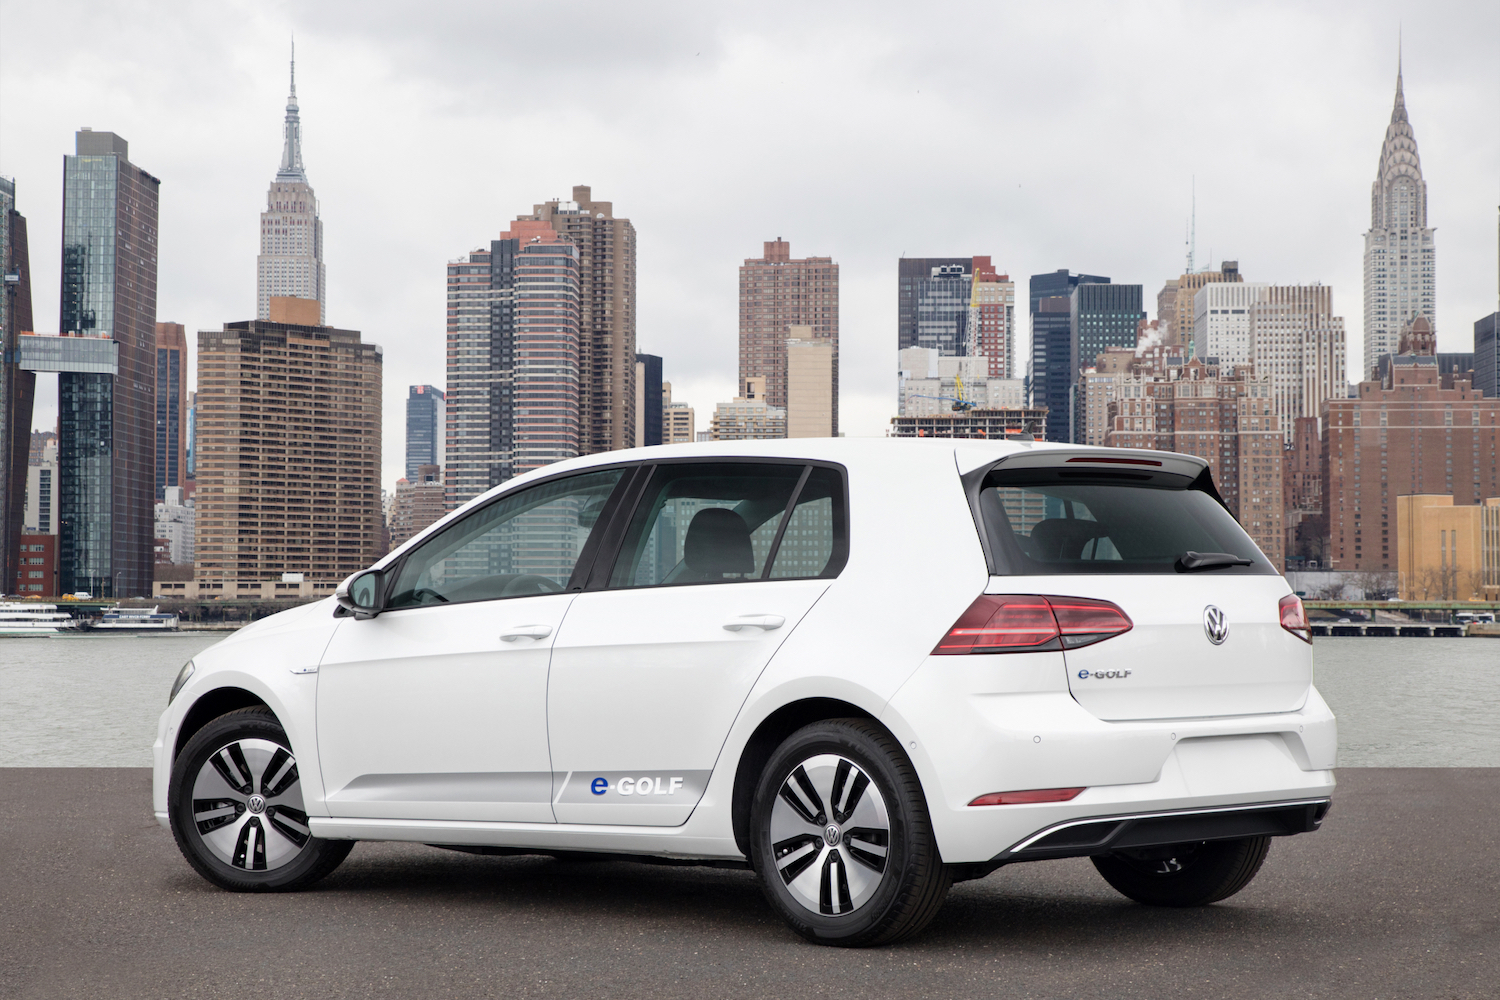 Rear end angle of 2017 Volkswagen e-Golf parked in front of a city with tall buildings.